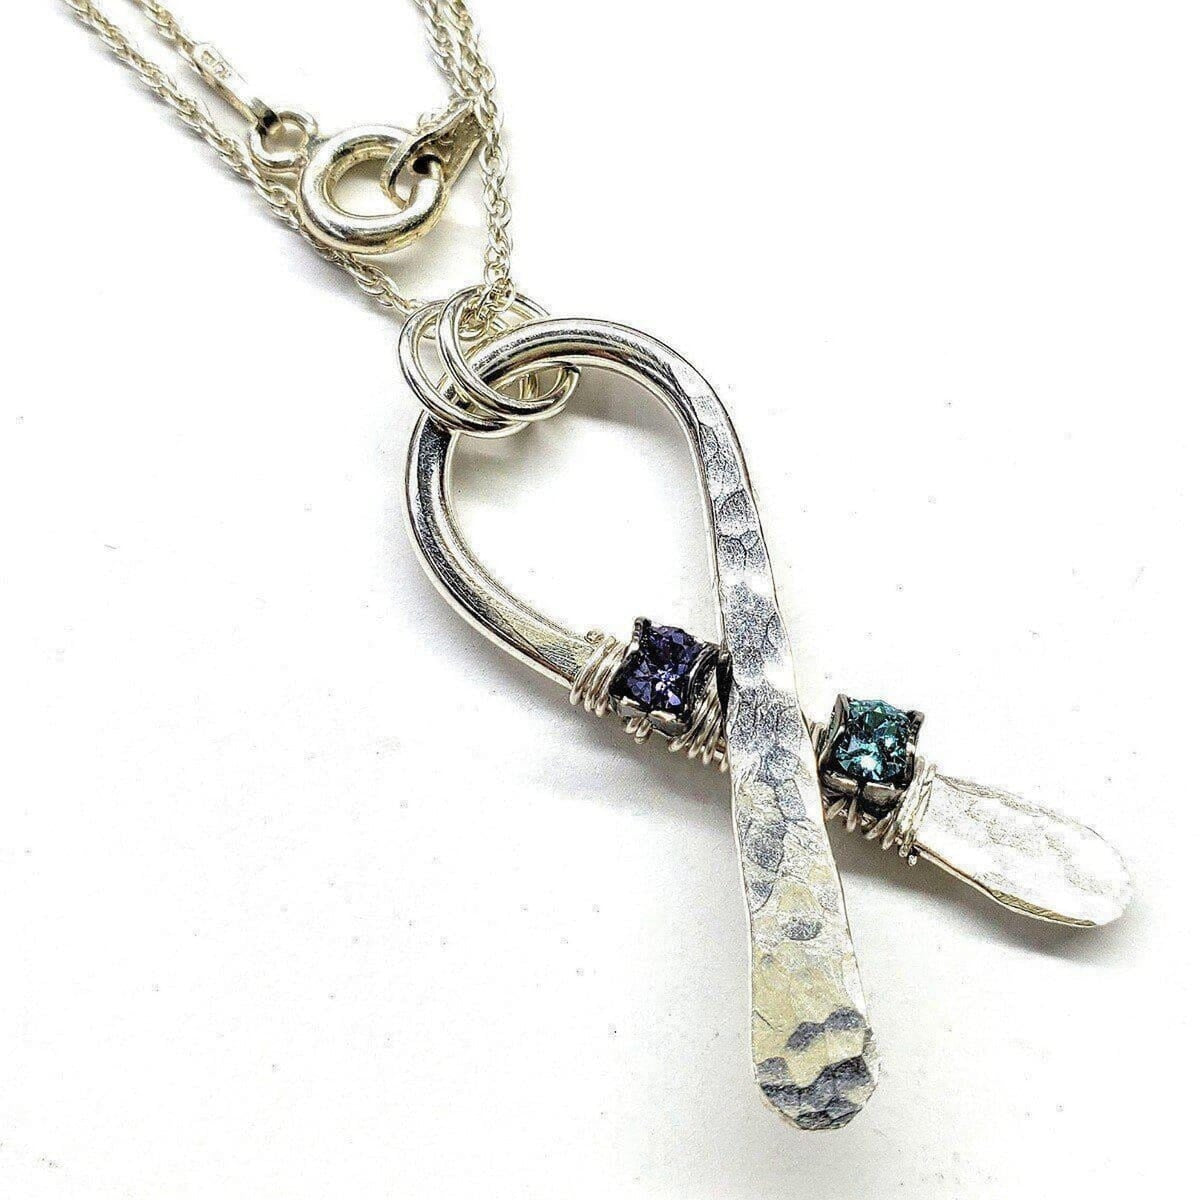 Silver Suicide Prevention Awareness Ribbon Necklace with Purple and Teal Crystals